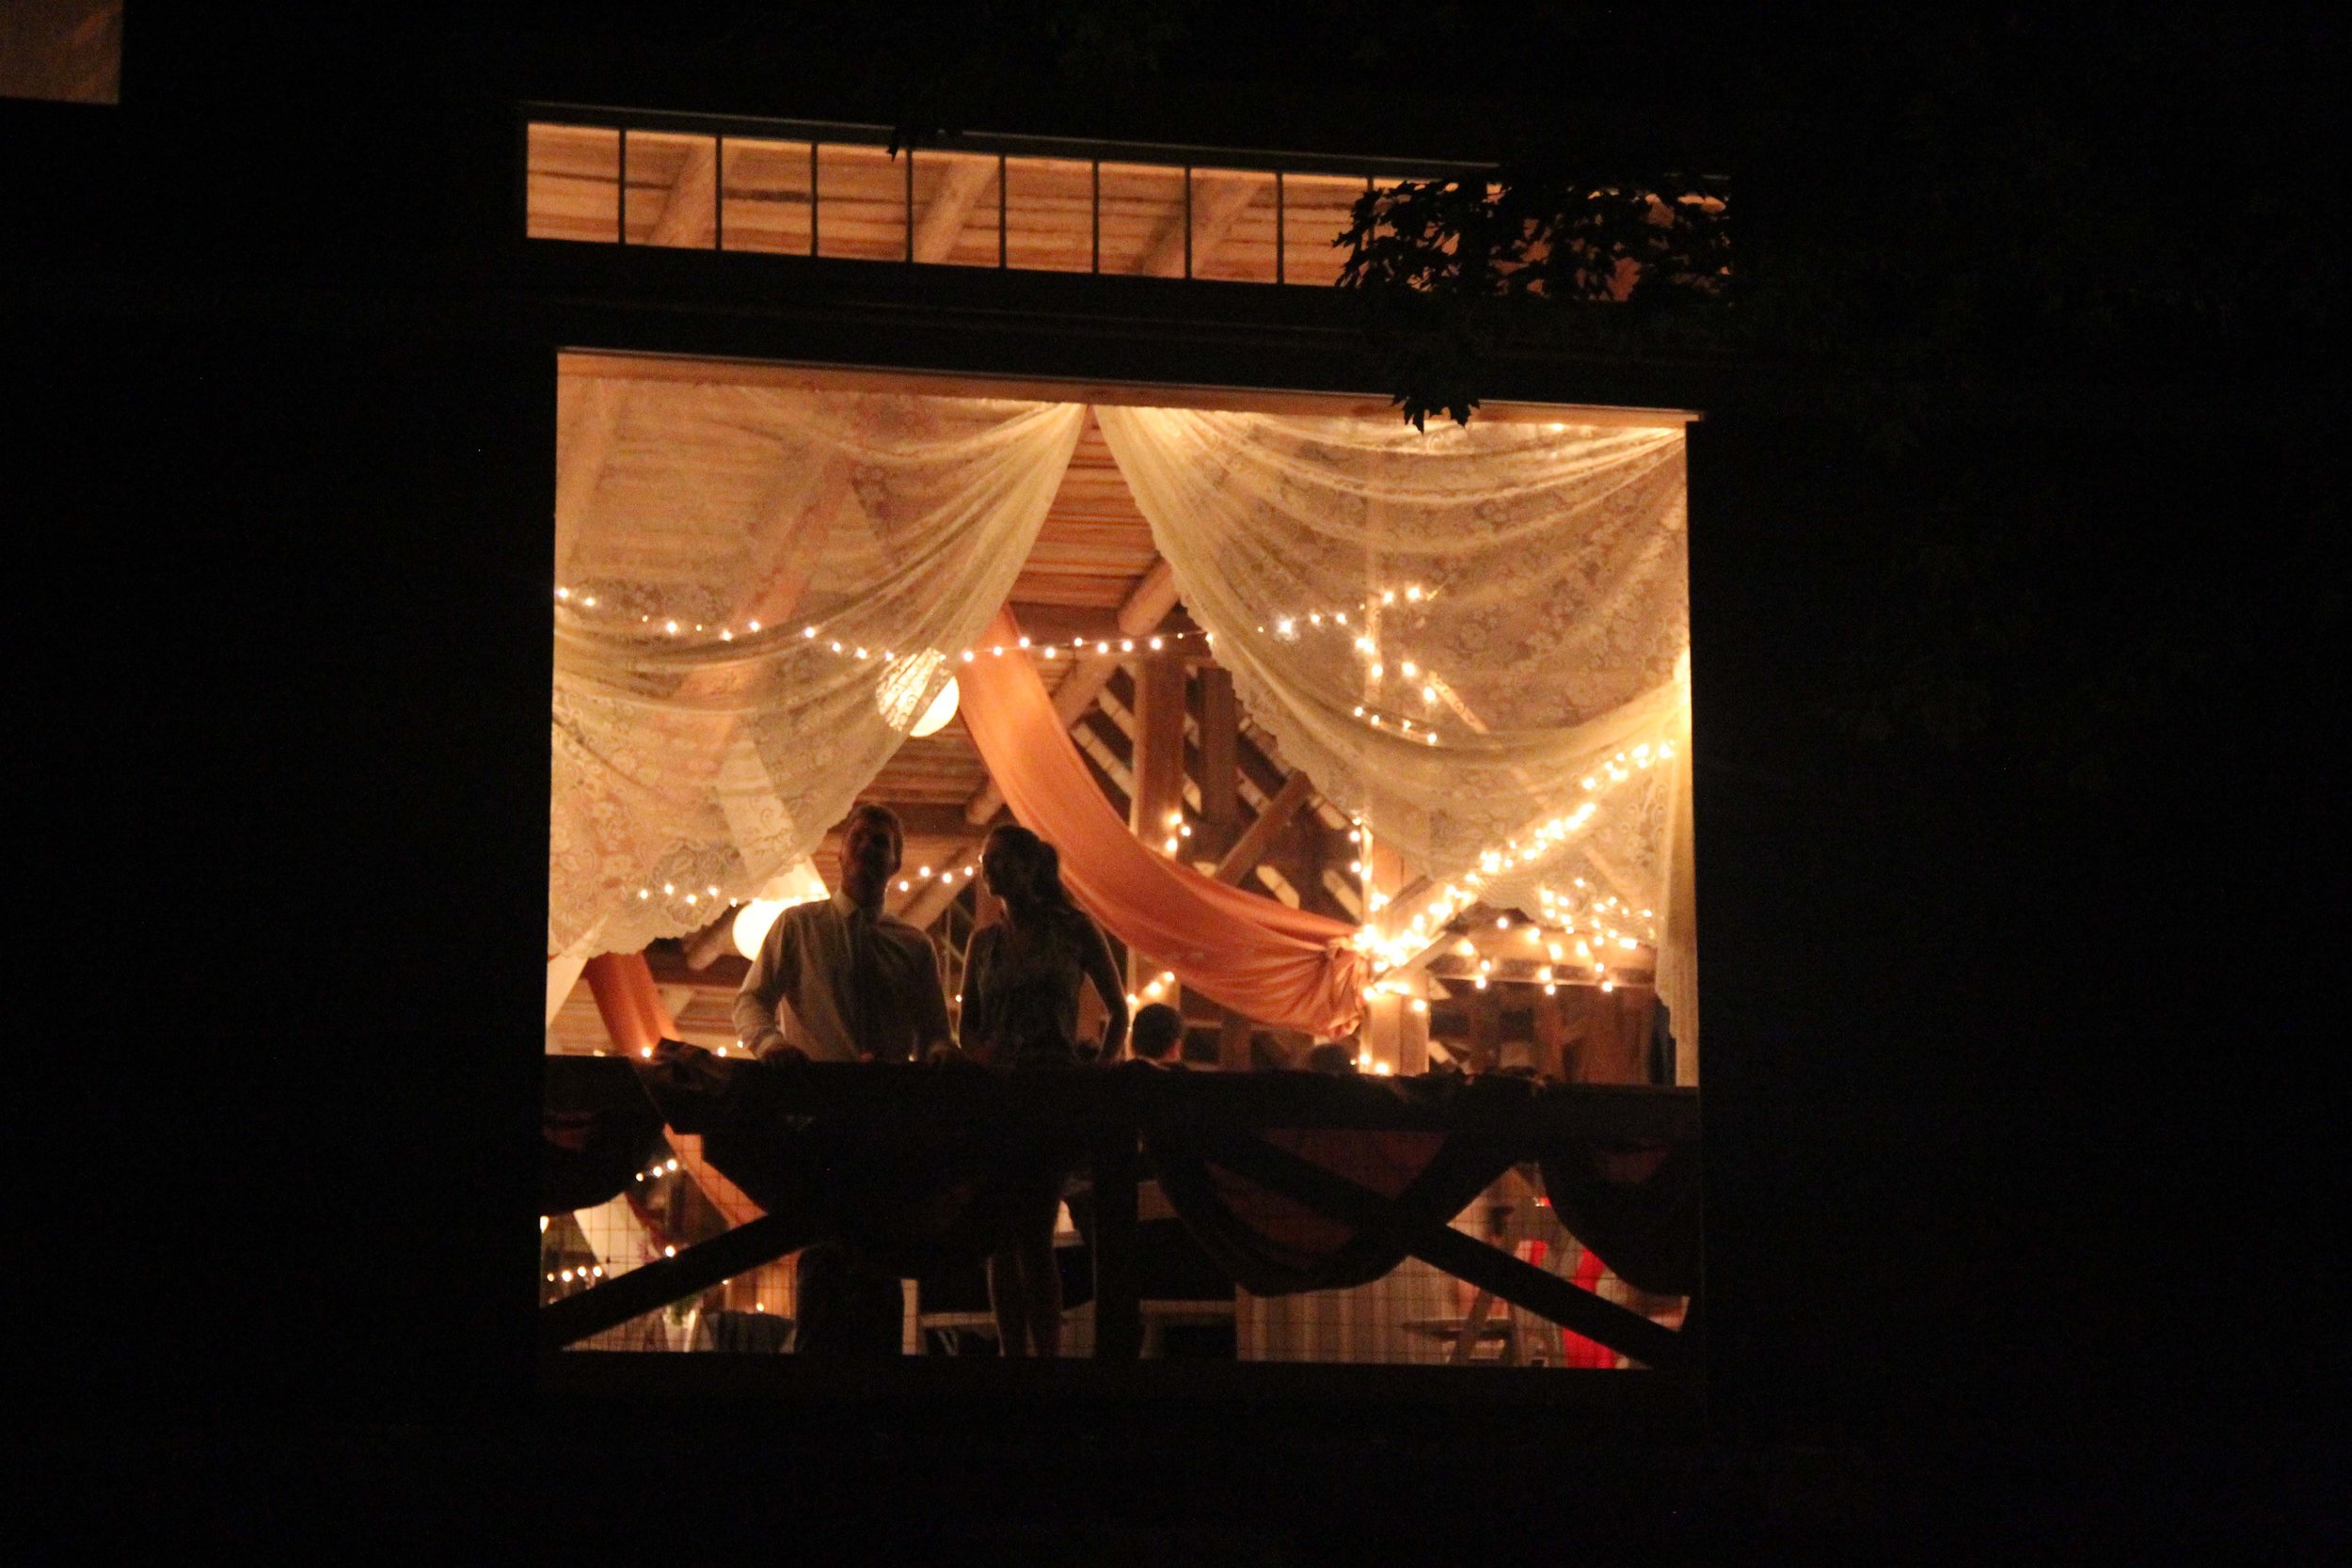 An outside view looking into to a lit barn with people celebrating